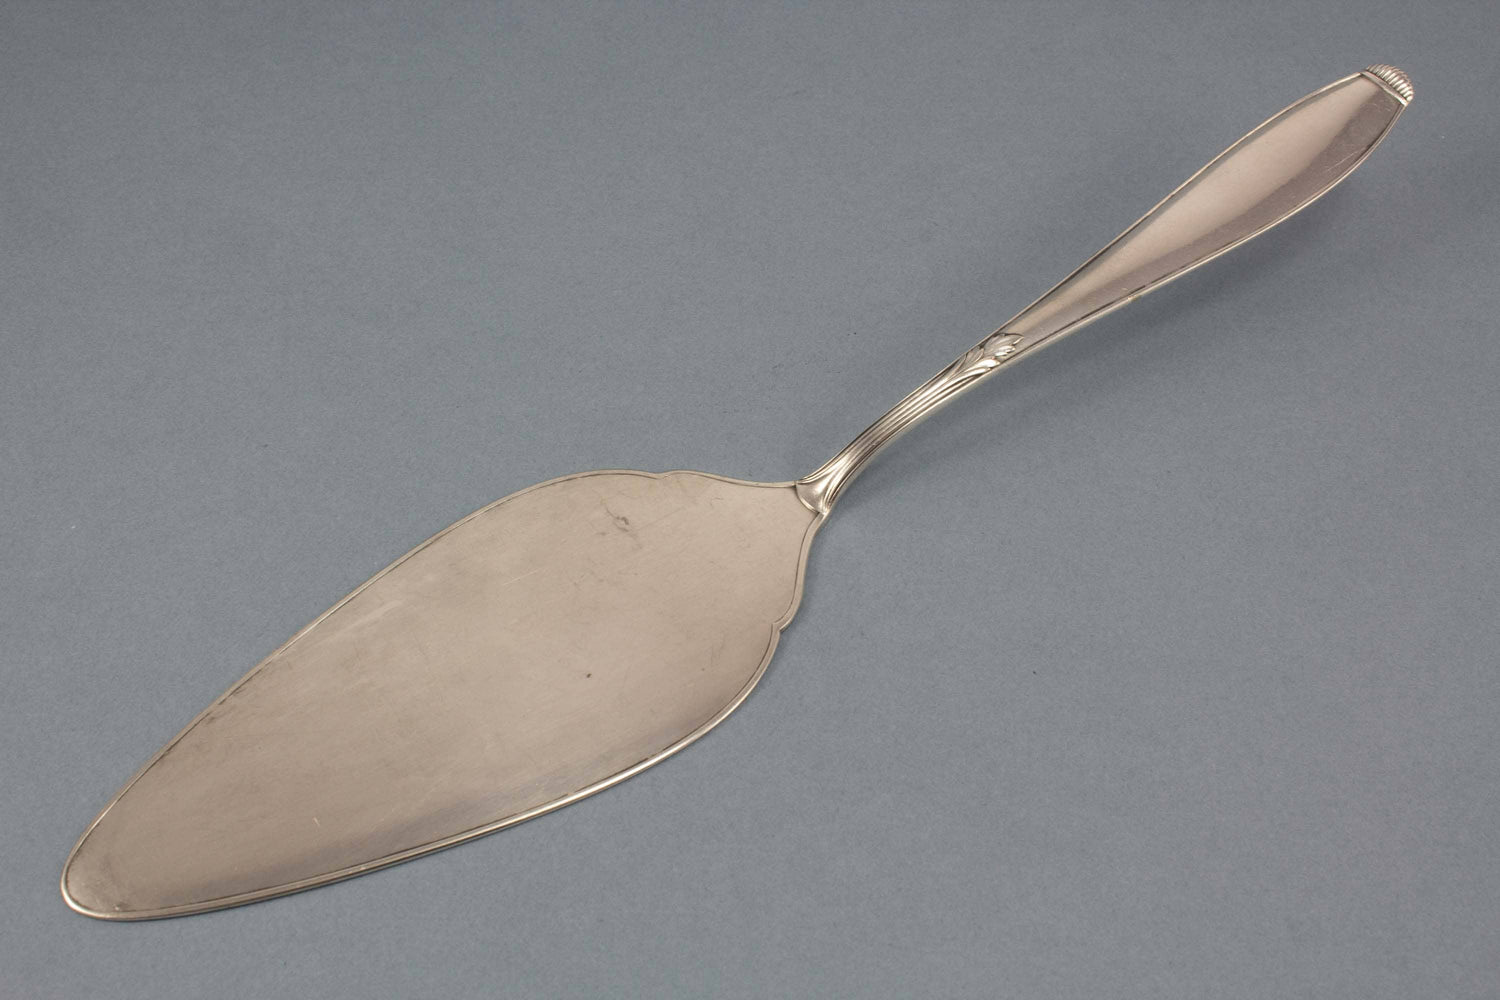 Large cake server, WMF, silver-plated, cutlery, lily, silver-plated cutlery, spoon, cake server